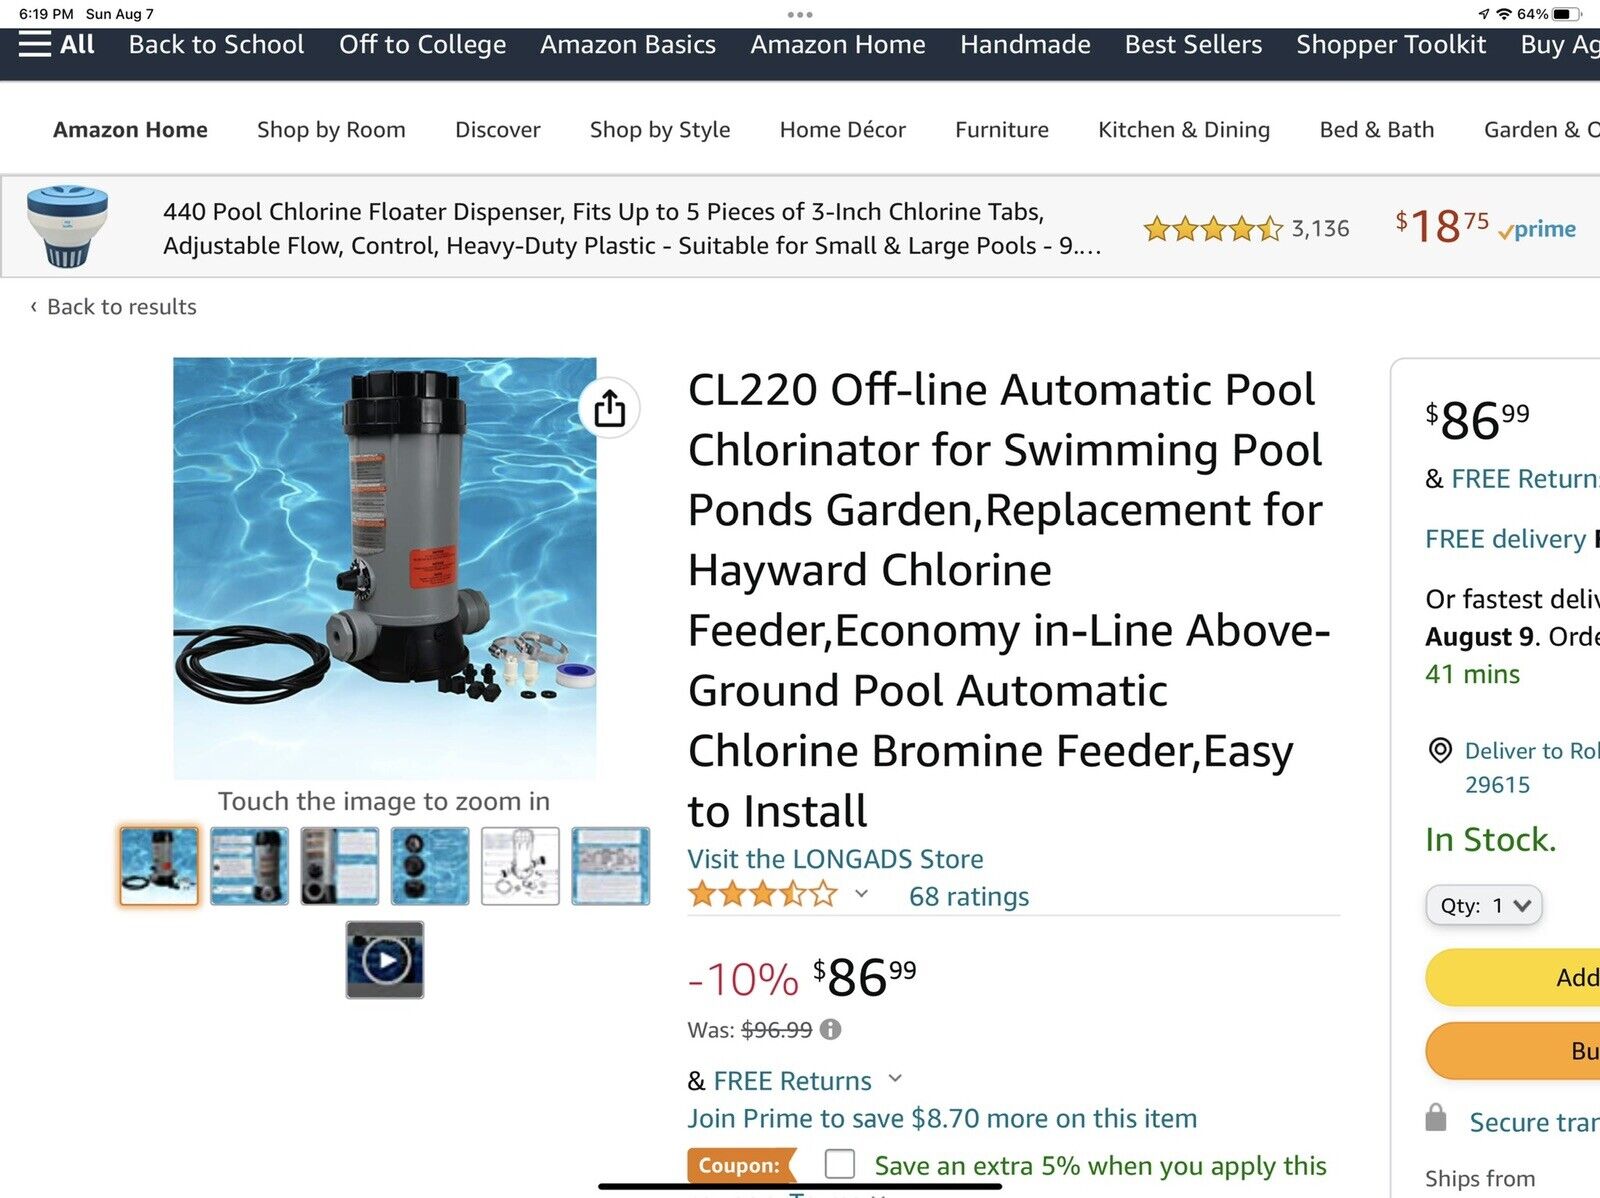 Off-line Automatic Chlorinator Feeder. Only Items In Pics. Available